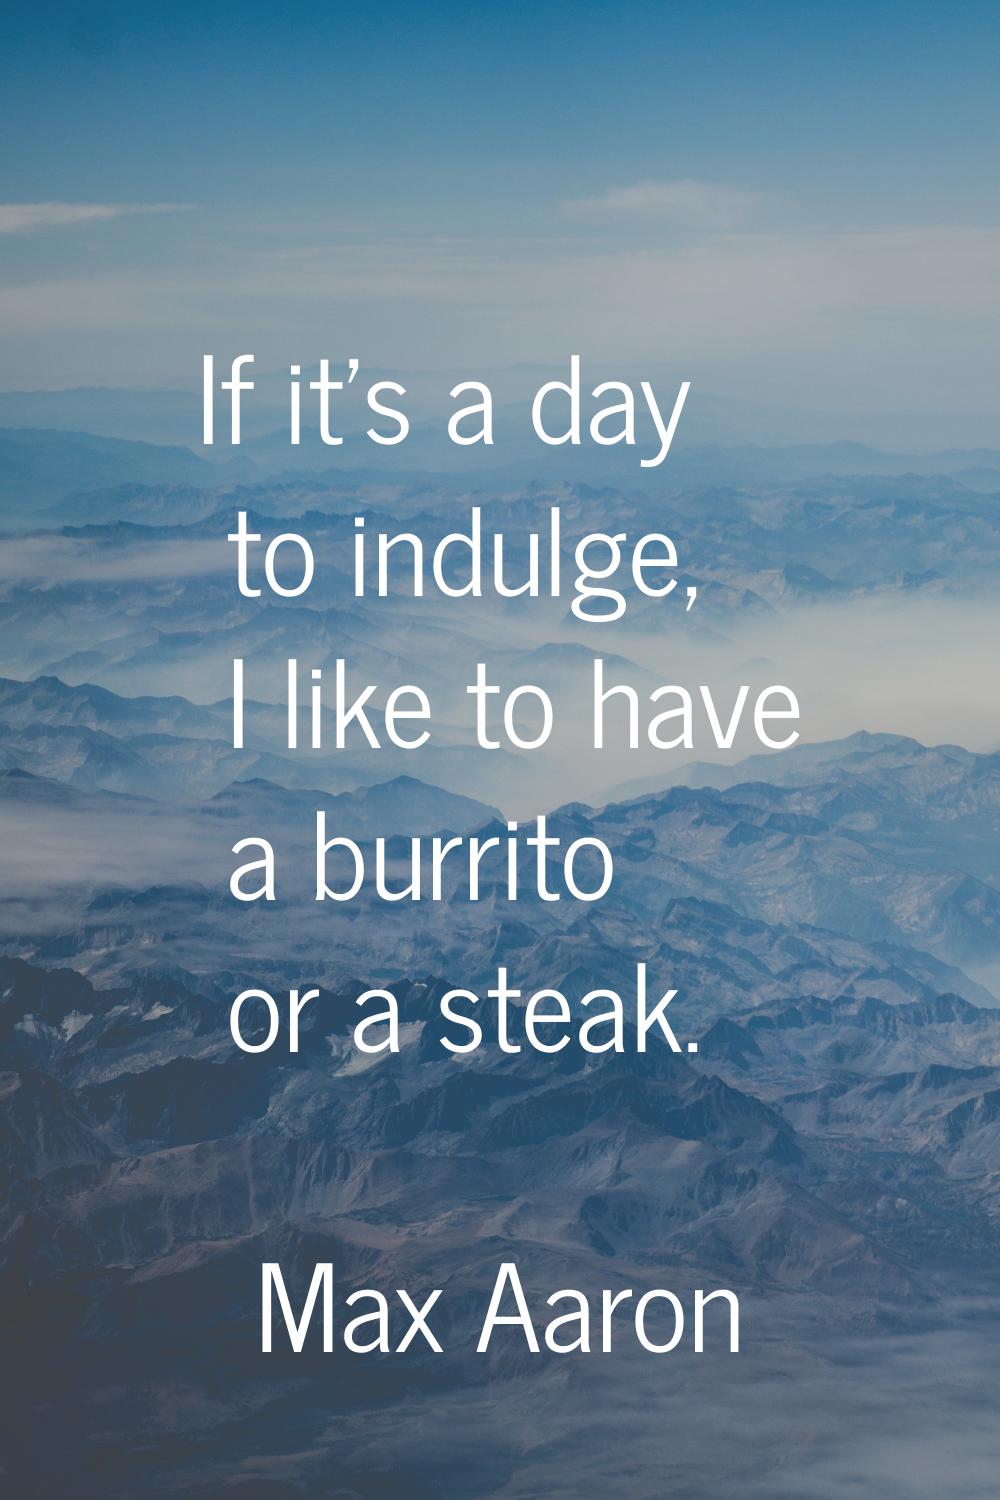 If it's a day to indulge, I like to have a burrito or a steak.